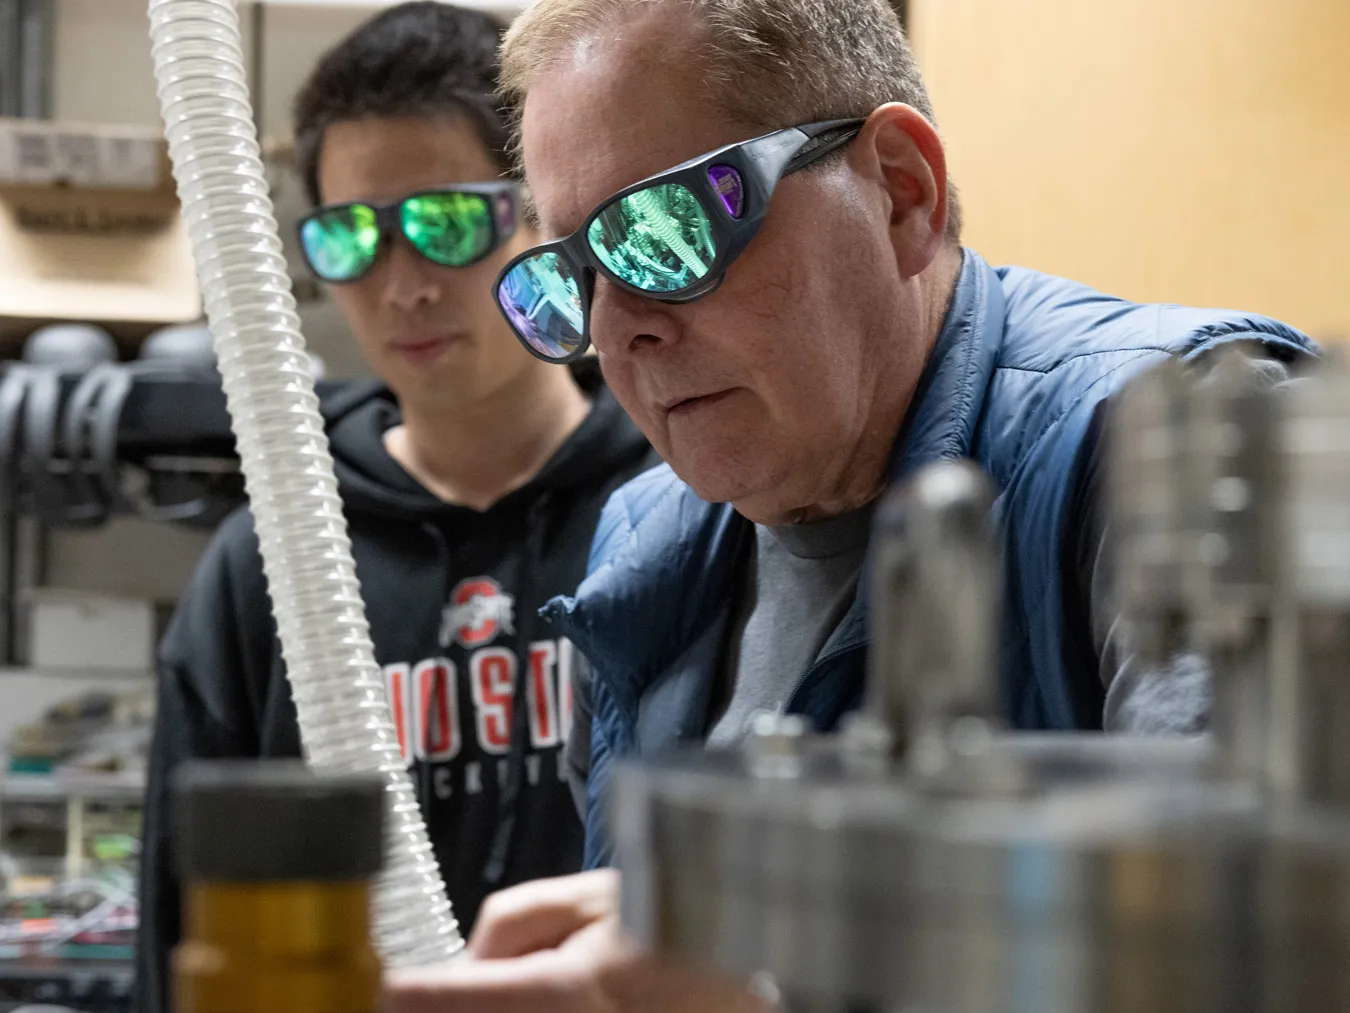 Both wearing safety goggles, Lou DiMauro and Yaguo Tang talk about a Quantum Trajectory Selector, which is the apparatus that lets them shoot lasers into gas to track electrons. Metal canisters and plastic tubes can be seen.